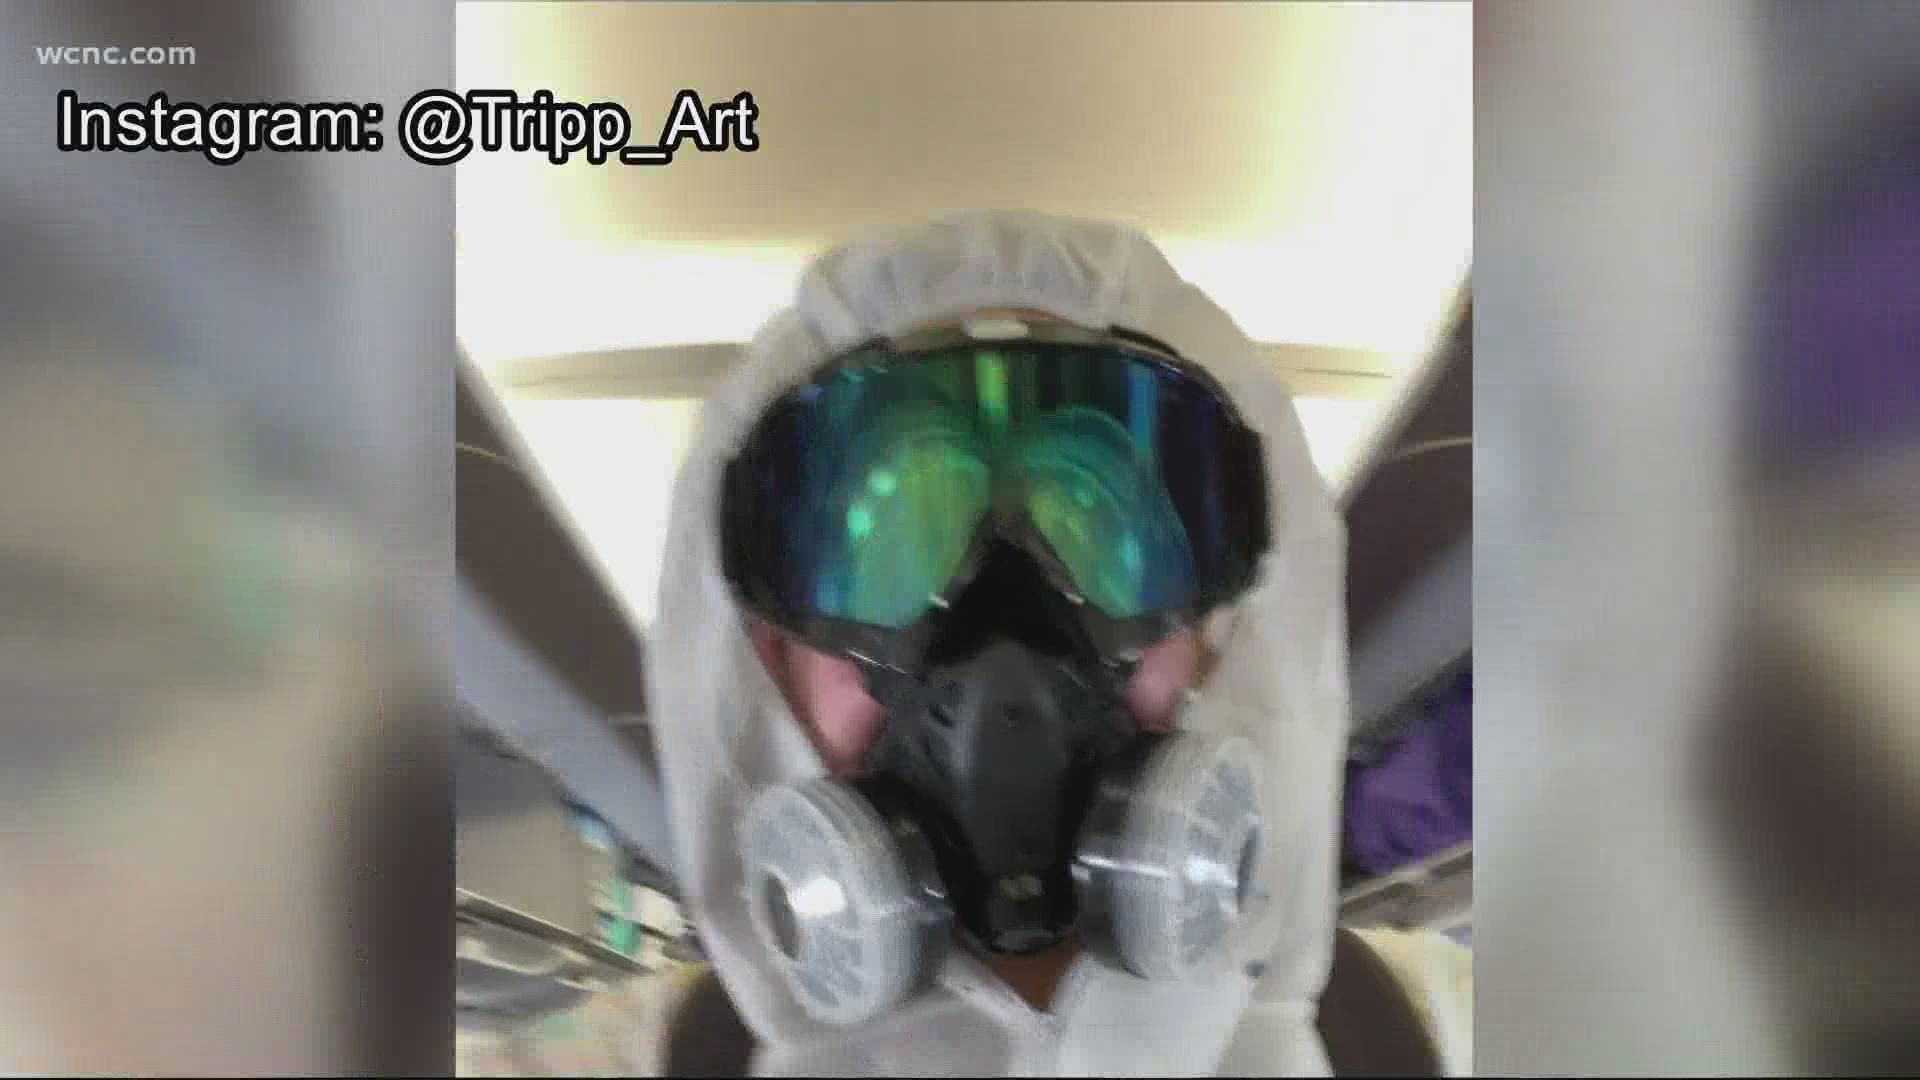 A man took his safety to the extreme while flying, wearing a complete hazmat suit with a respirator on his flight back to Charlotte.